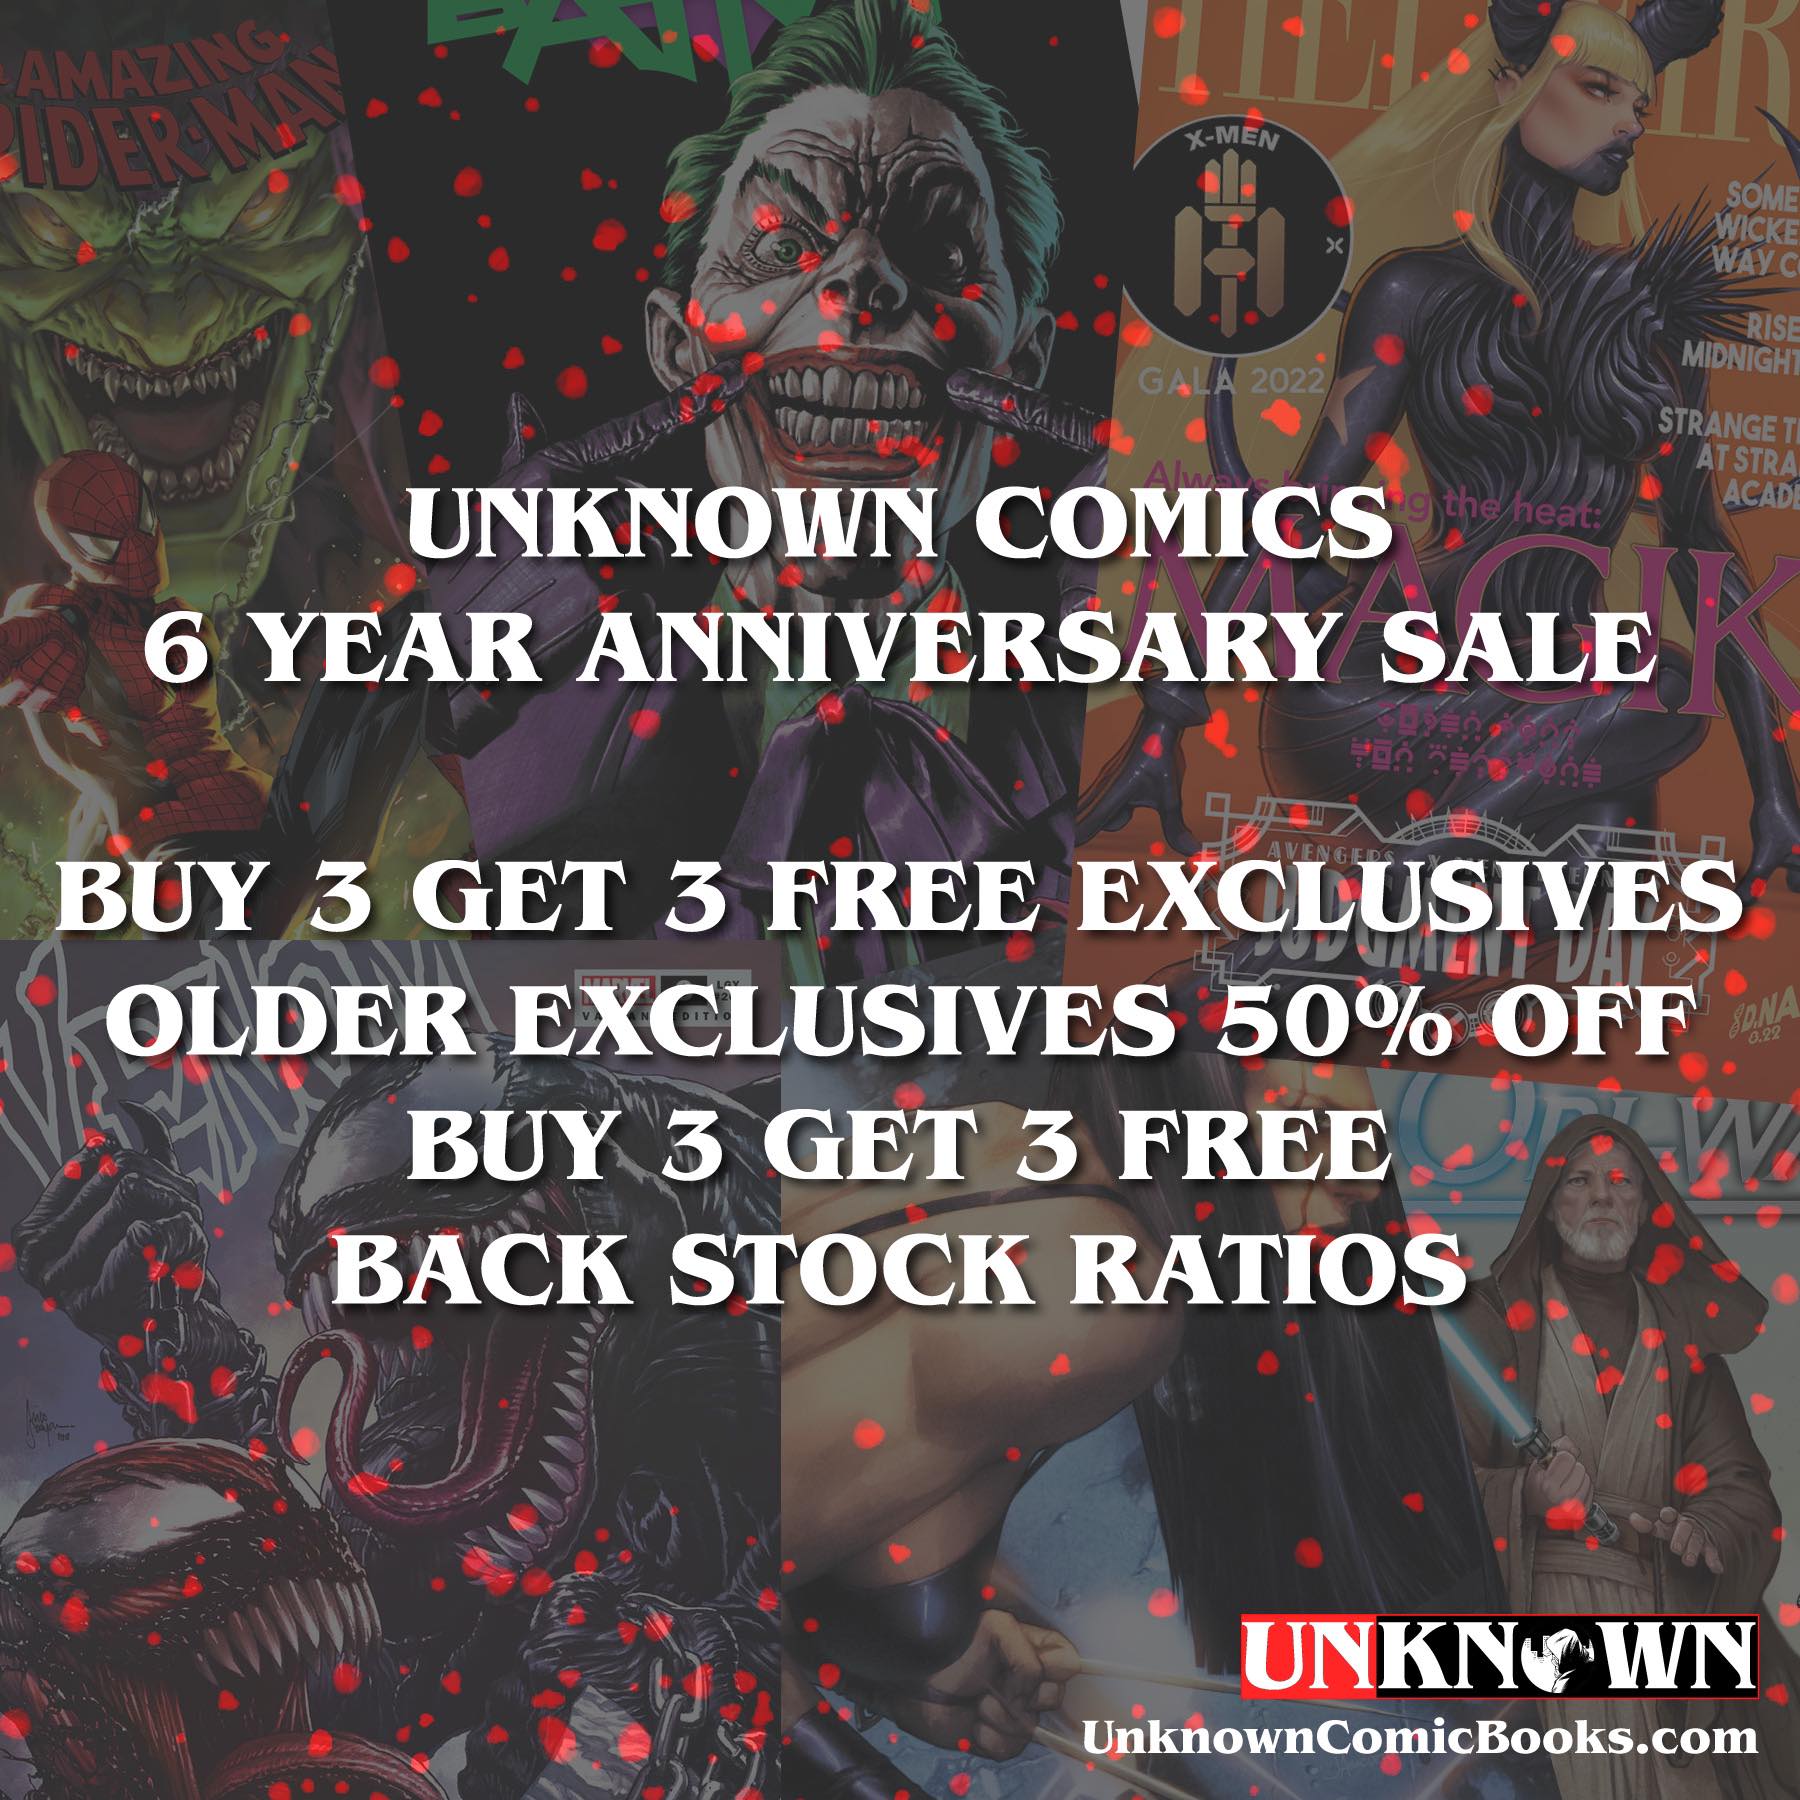 K . 3 Y ..'o A .c .". PN s F g LA e - '.. Q. UNKNOWN comics R YEAR ANNIVERSARY SALE BUY 3 GET 3 FREE EXCLUSIVES. OLDER EXCLUSIVES 50o OFF 5 BUYSGETEFKEE ;: BACK STOCK RATroS b :-"'-'.. . R e .o;.'-' e 4 L - N - N S TR UNKN'WN RGP - ",.". g !.kikownCo;nicBooks.com Ny A ! , 